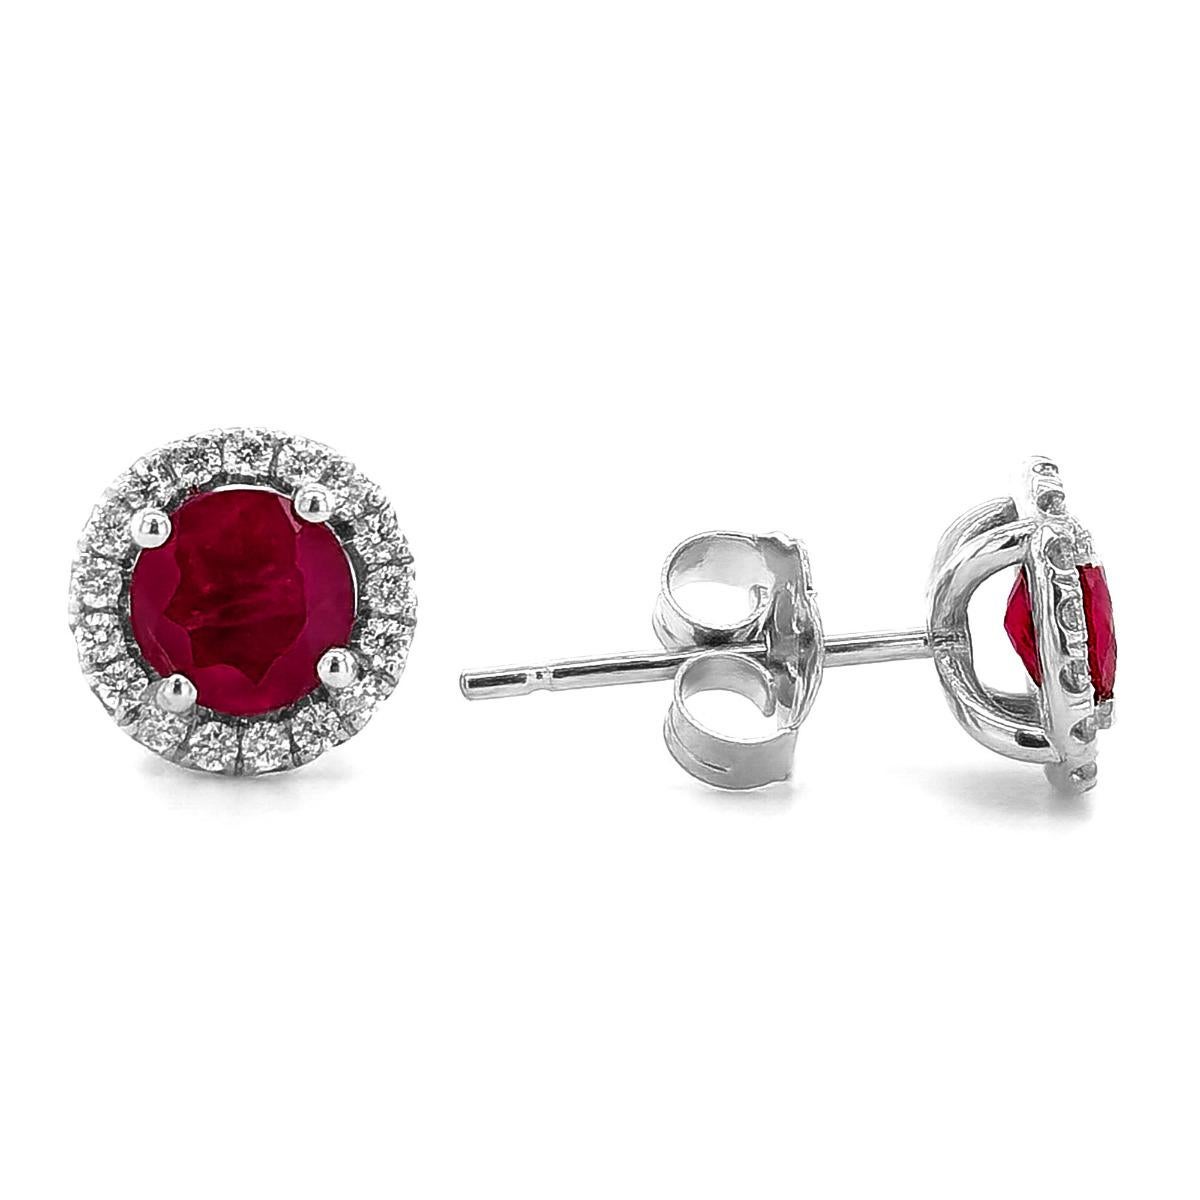 Mixed Cut Natural Ruby 1.07 Carats set in 14K White Gold Earrings with Diamonds  For Sale